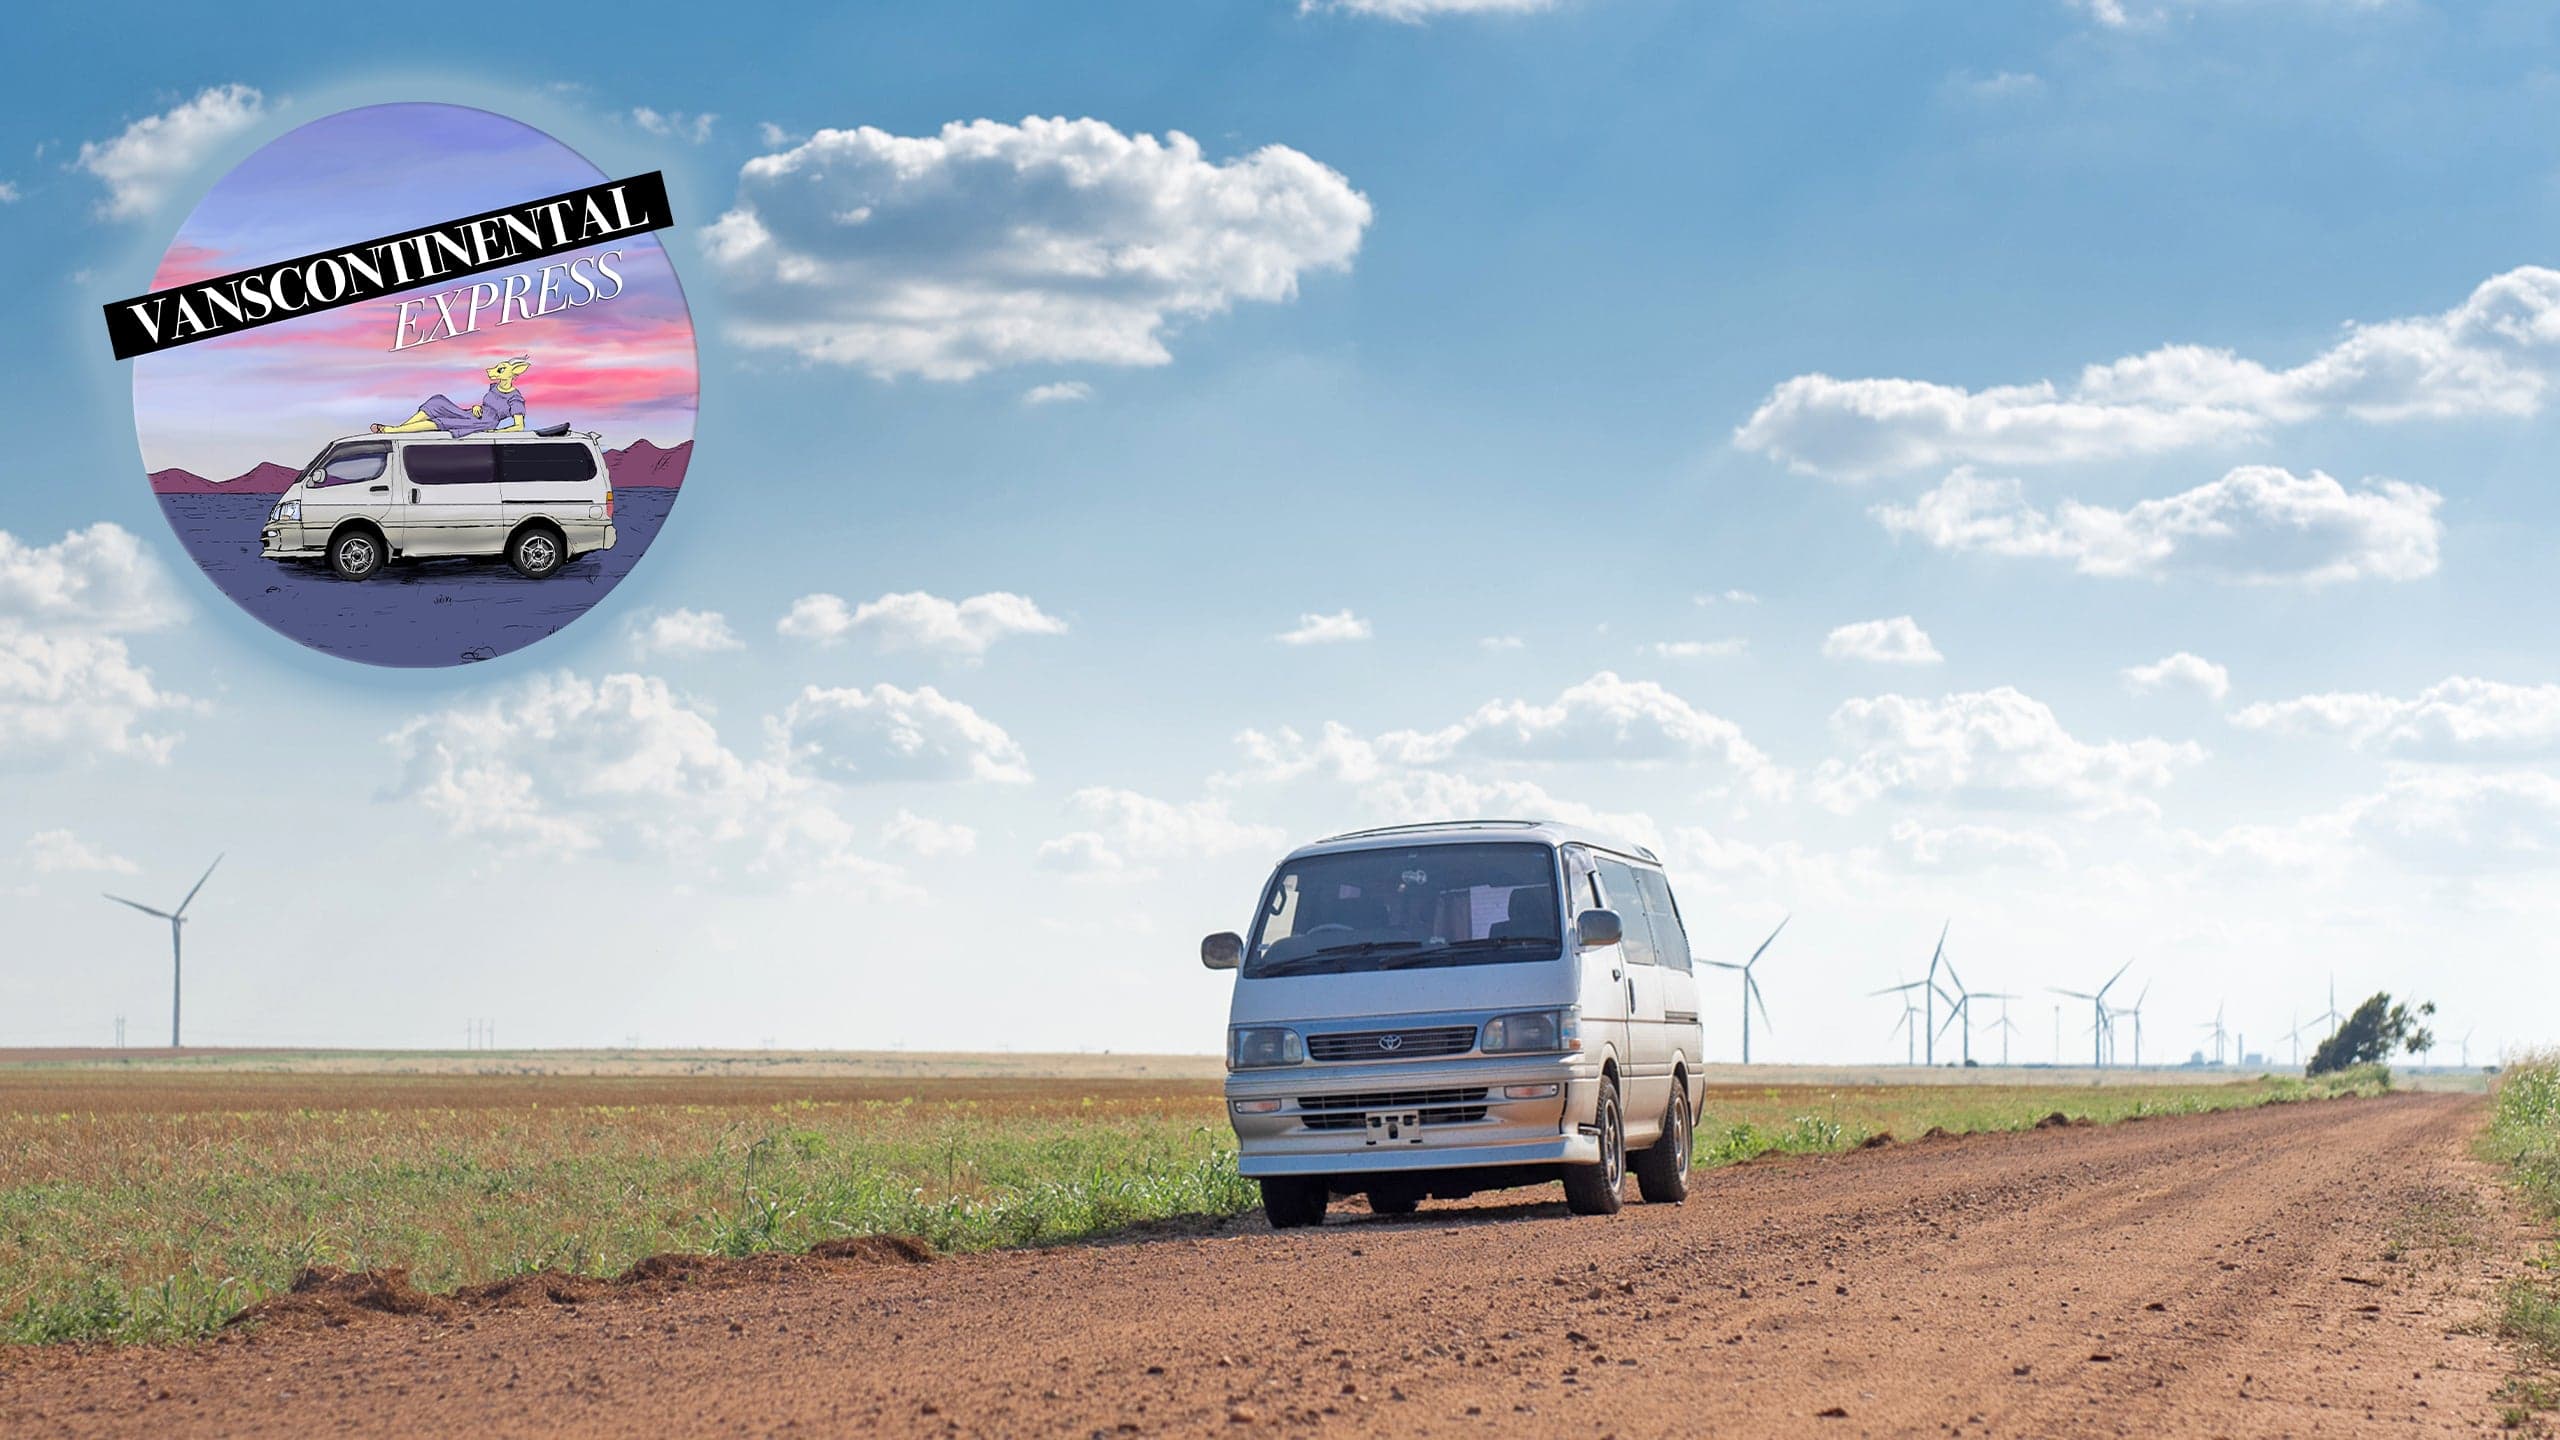 The Great Escape: Driving My JDM Toyota Van Out of Texas, Due West